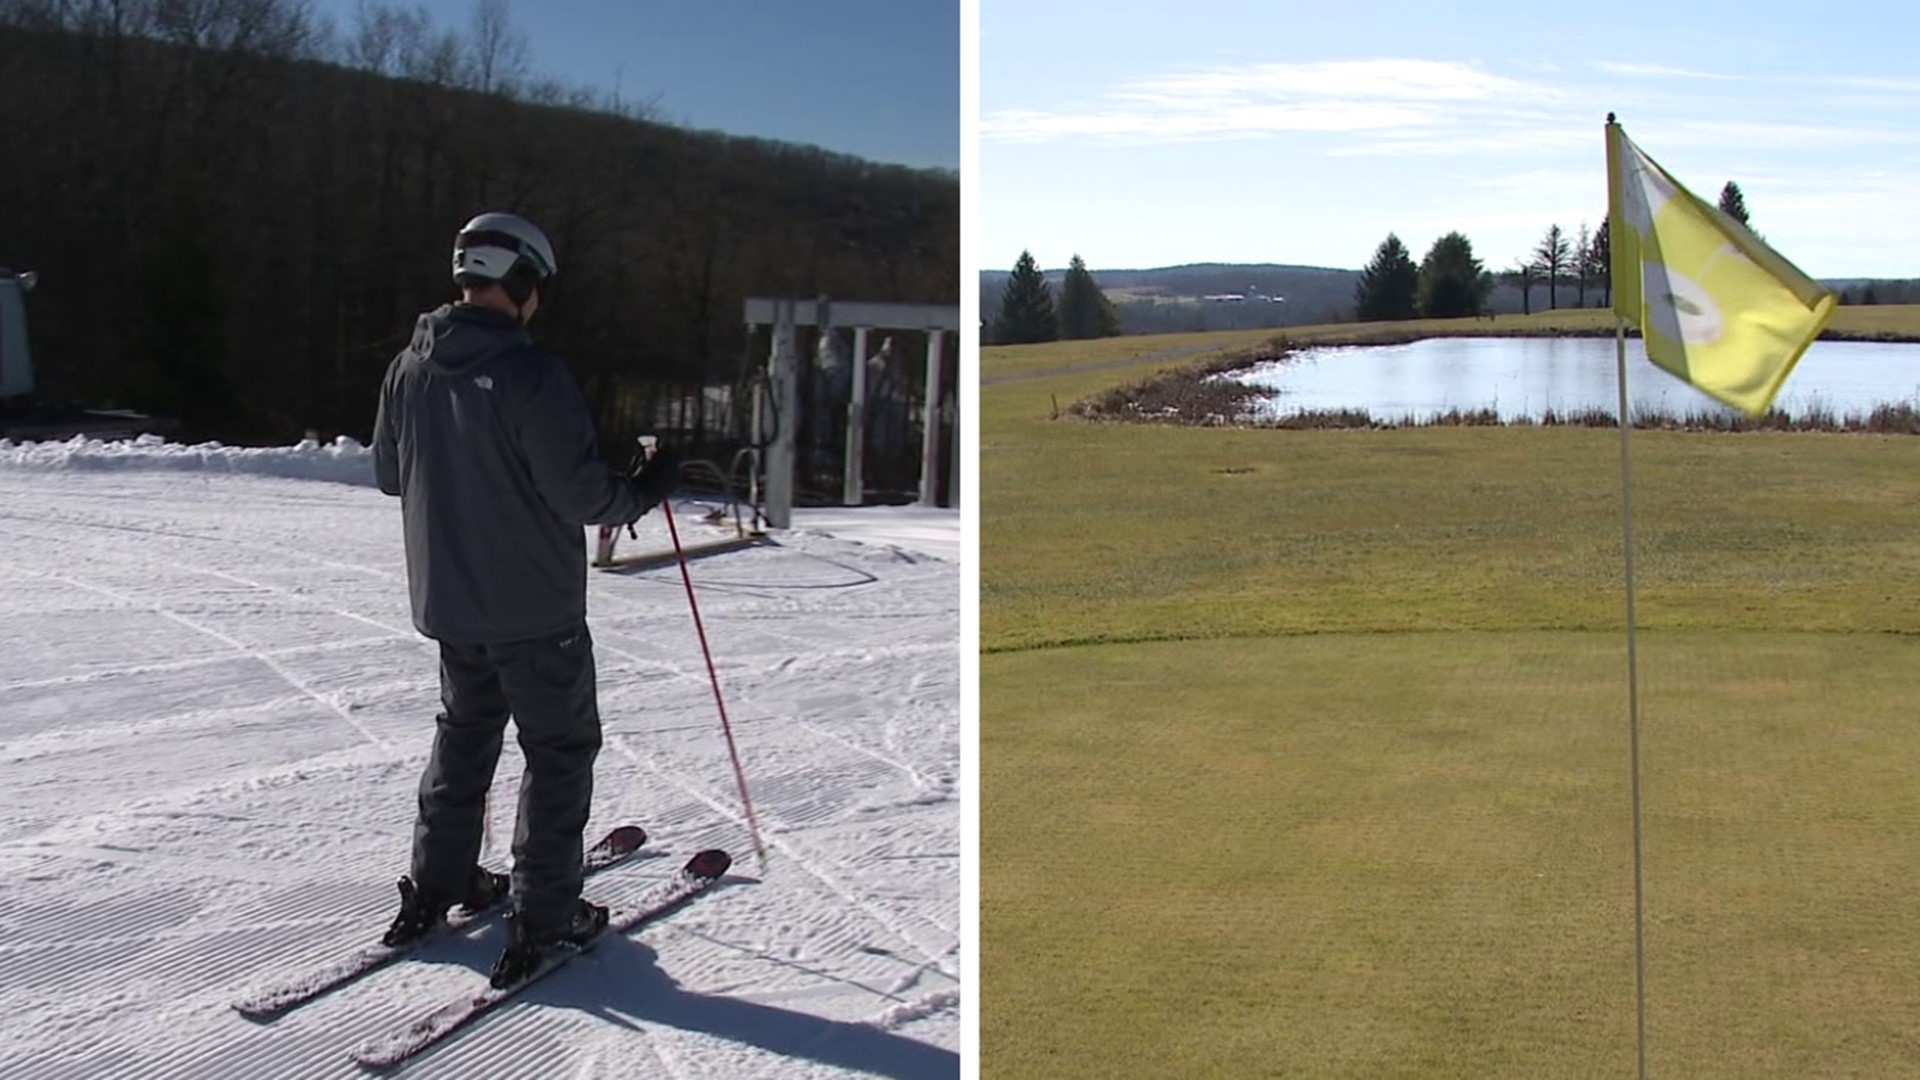 A golf course opened for a few days for golfers to take advantage of the warm weather, while an area ski resort has ideal conditions for skiers and snowboarders.